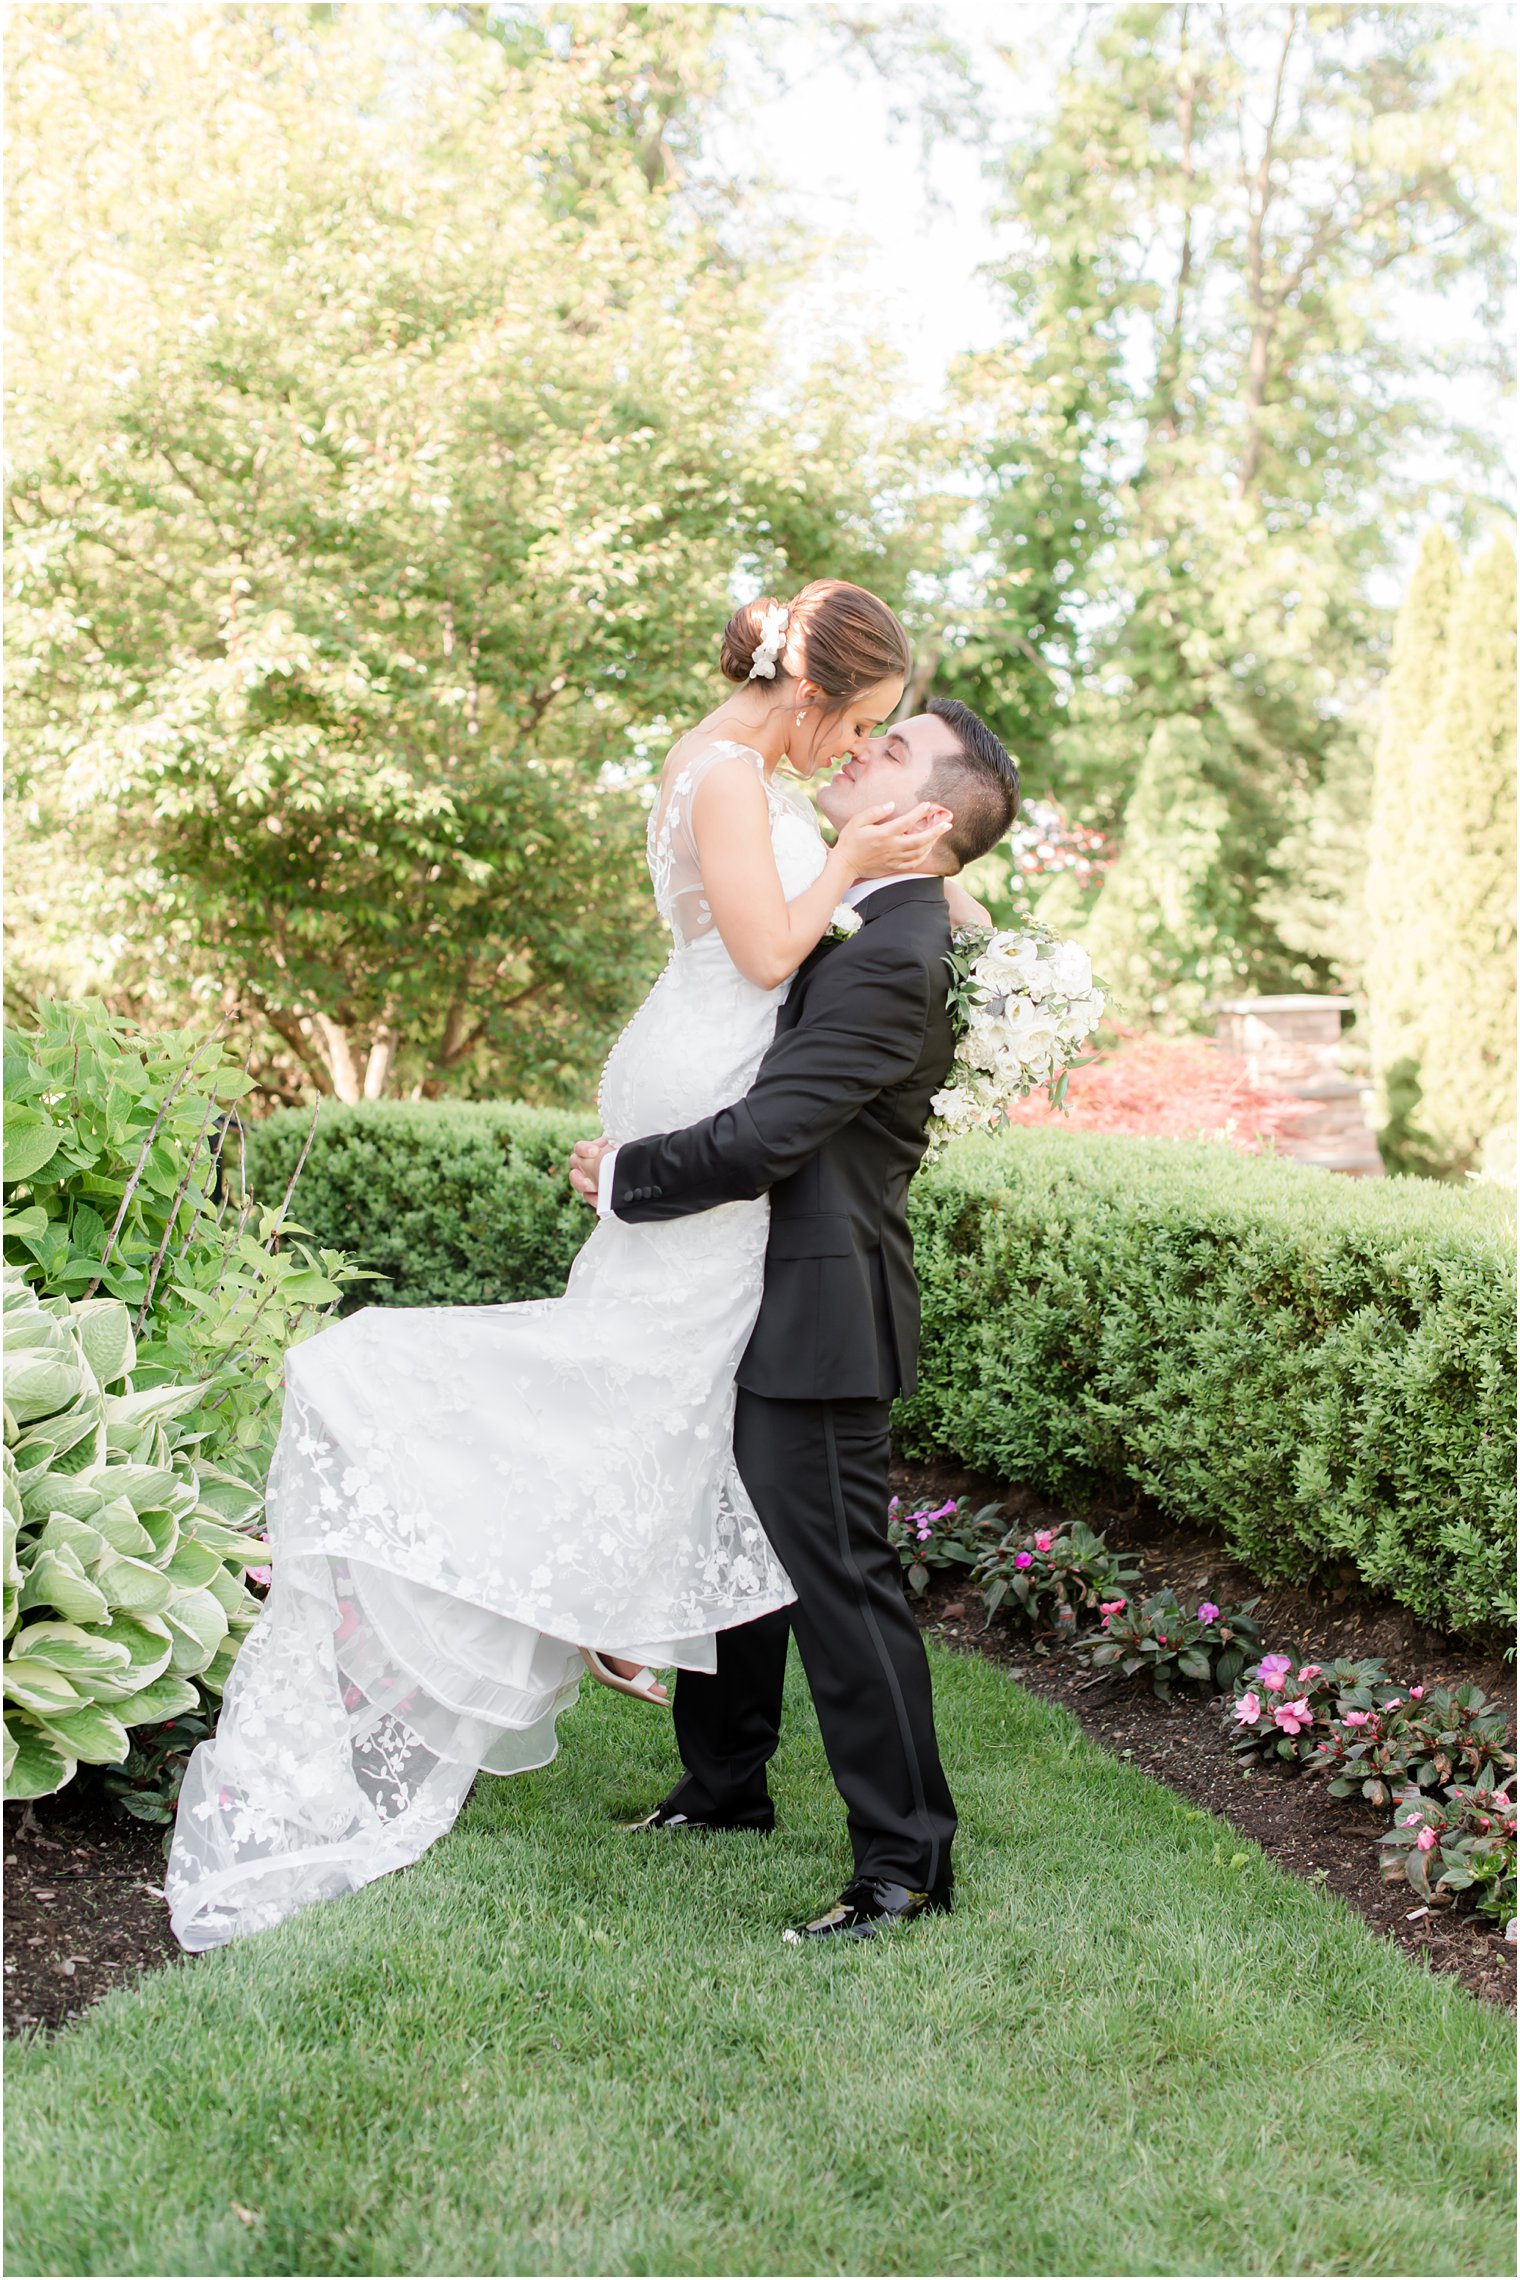 groom lifts bride up in gardens in New Jersey during wedding photos 